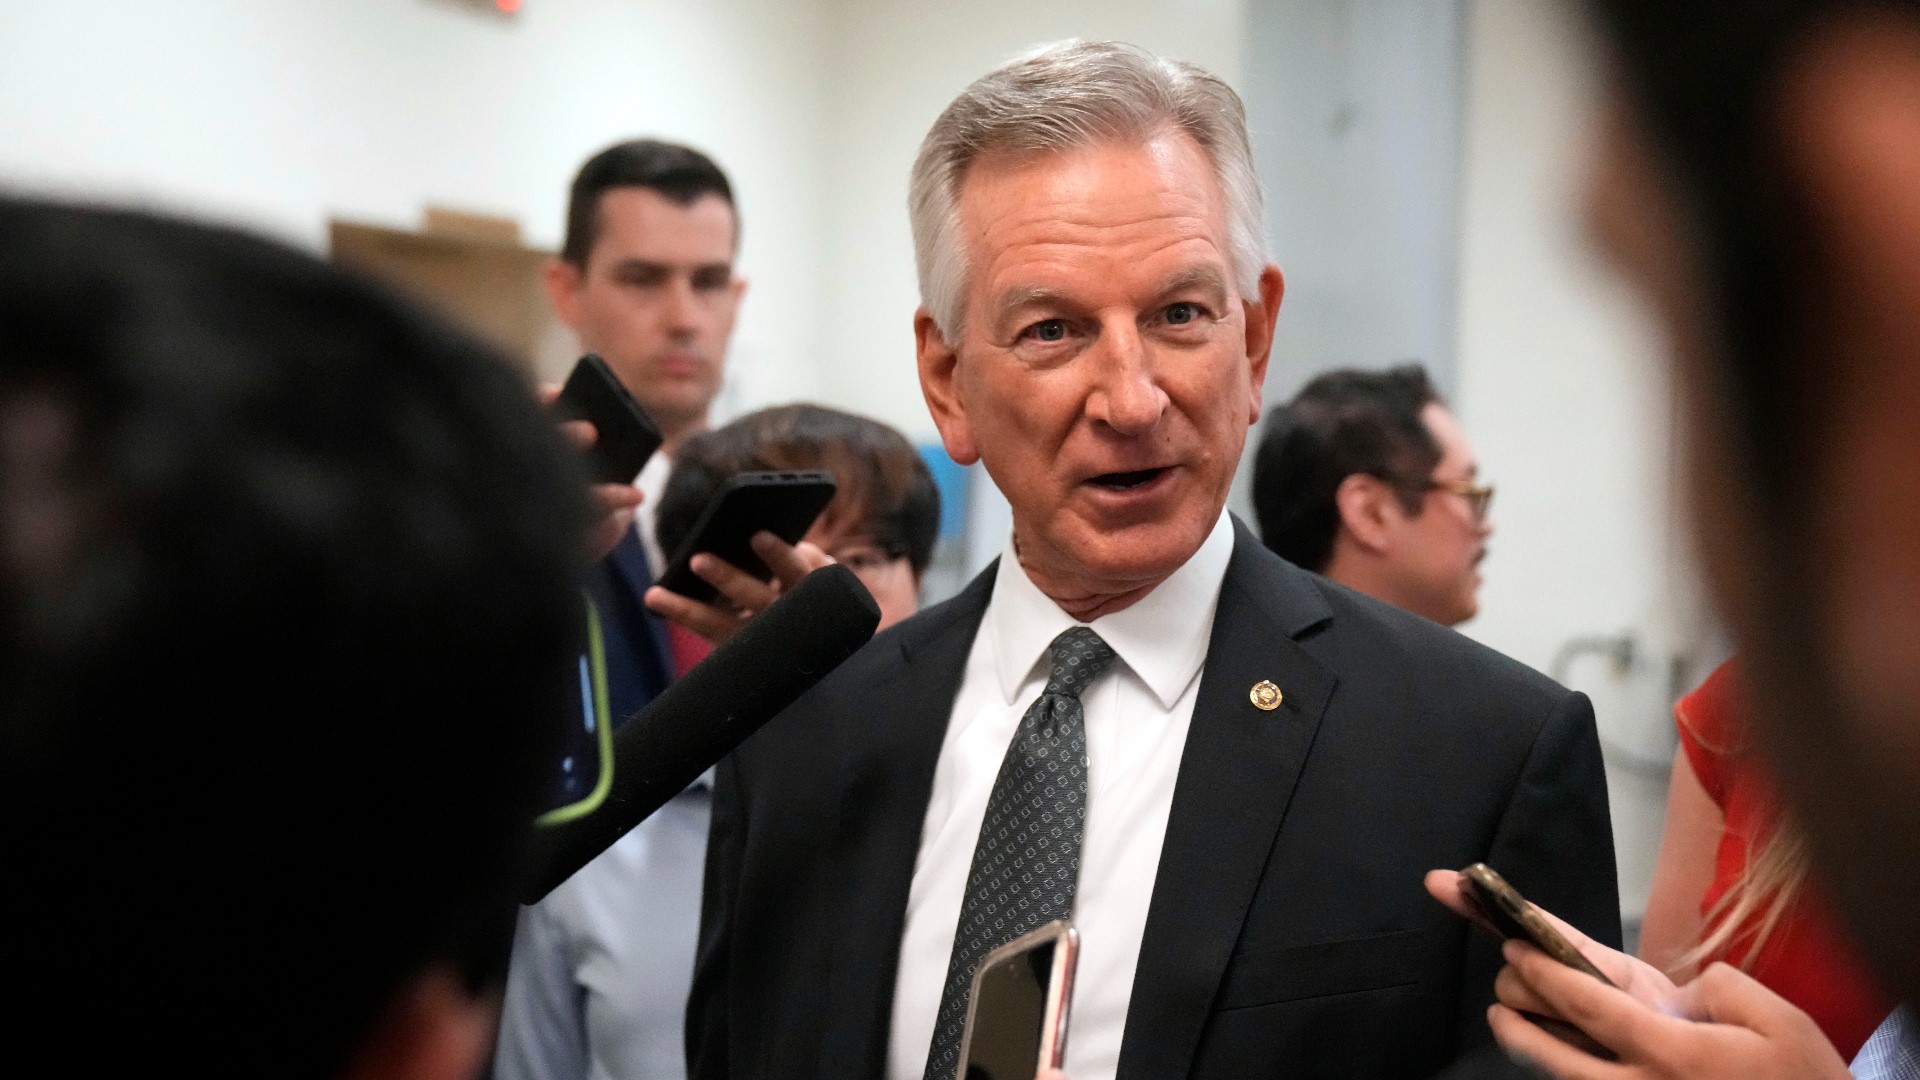 Tommy Tuberville stood in the way of over 300 military promotions in a continued standoff over the military's in-service abortion policy.